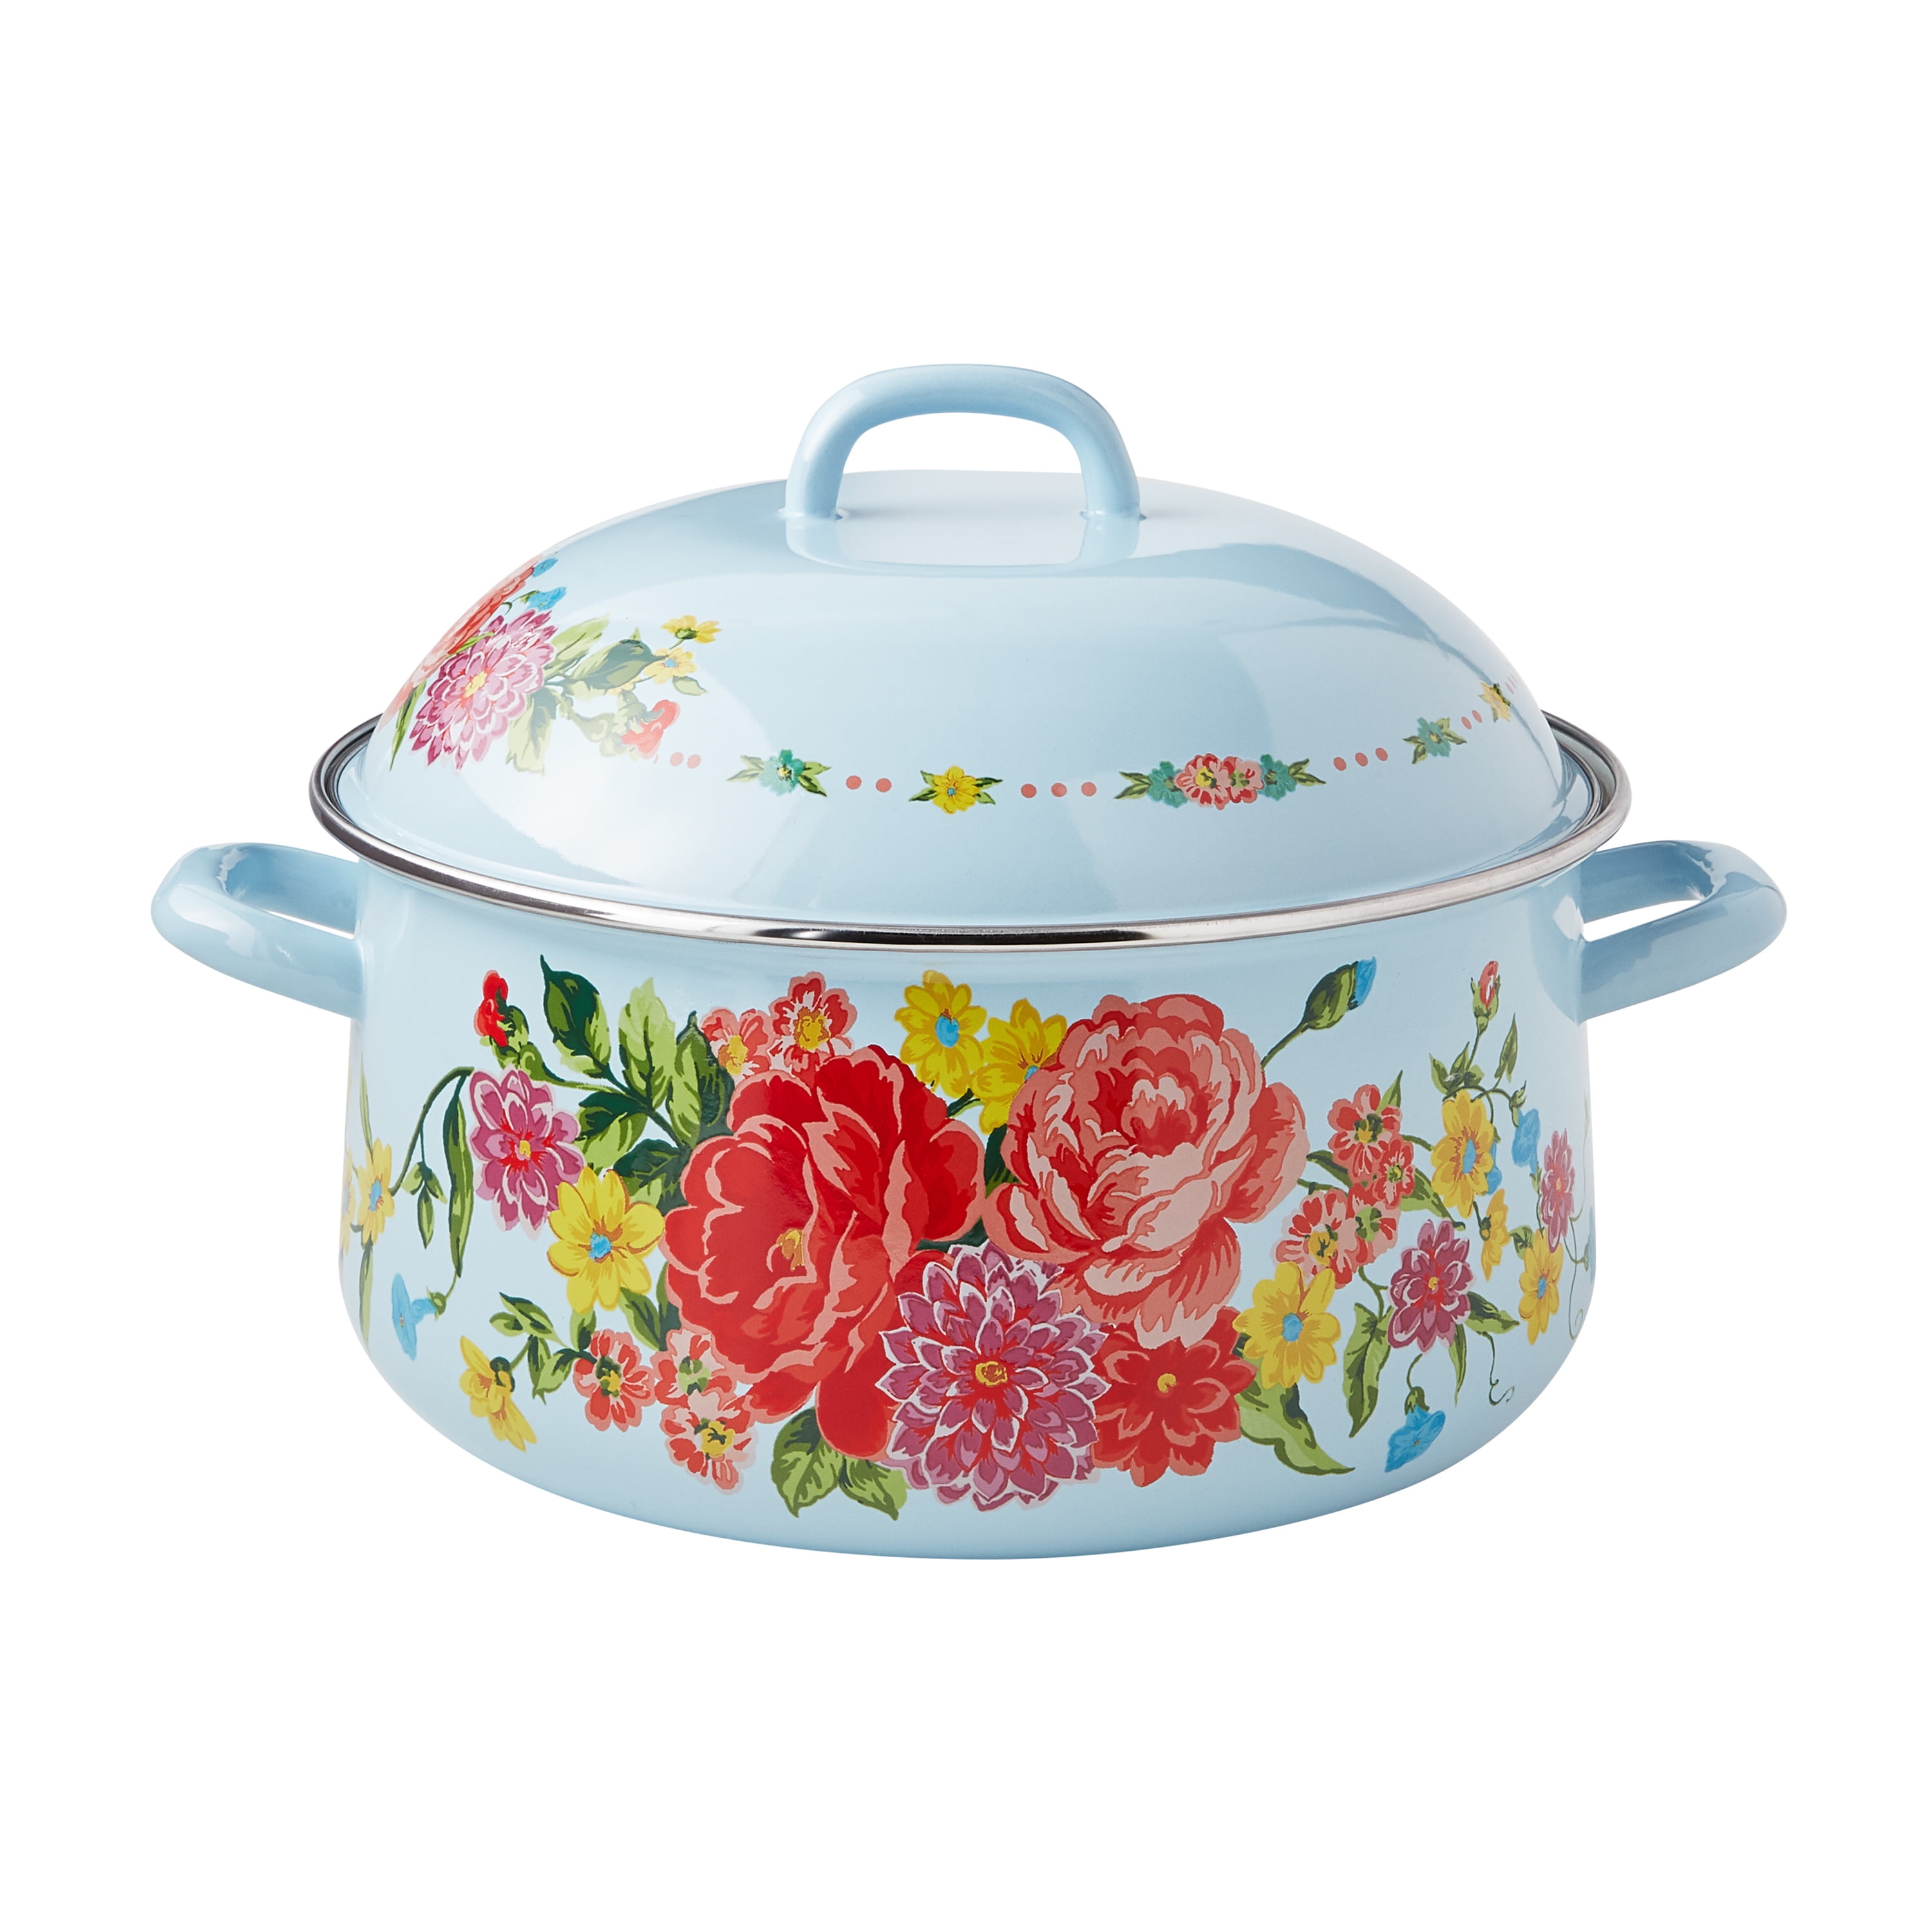 The Pioneer Woman Vintage Floral 4 Quart Dutch Oven With Lid